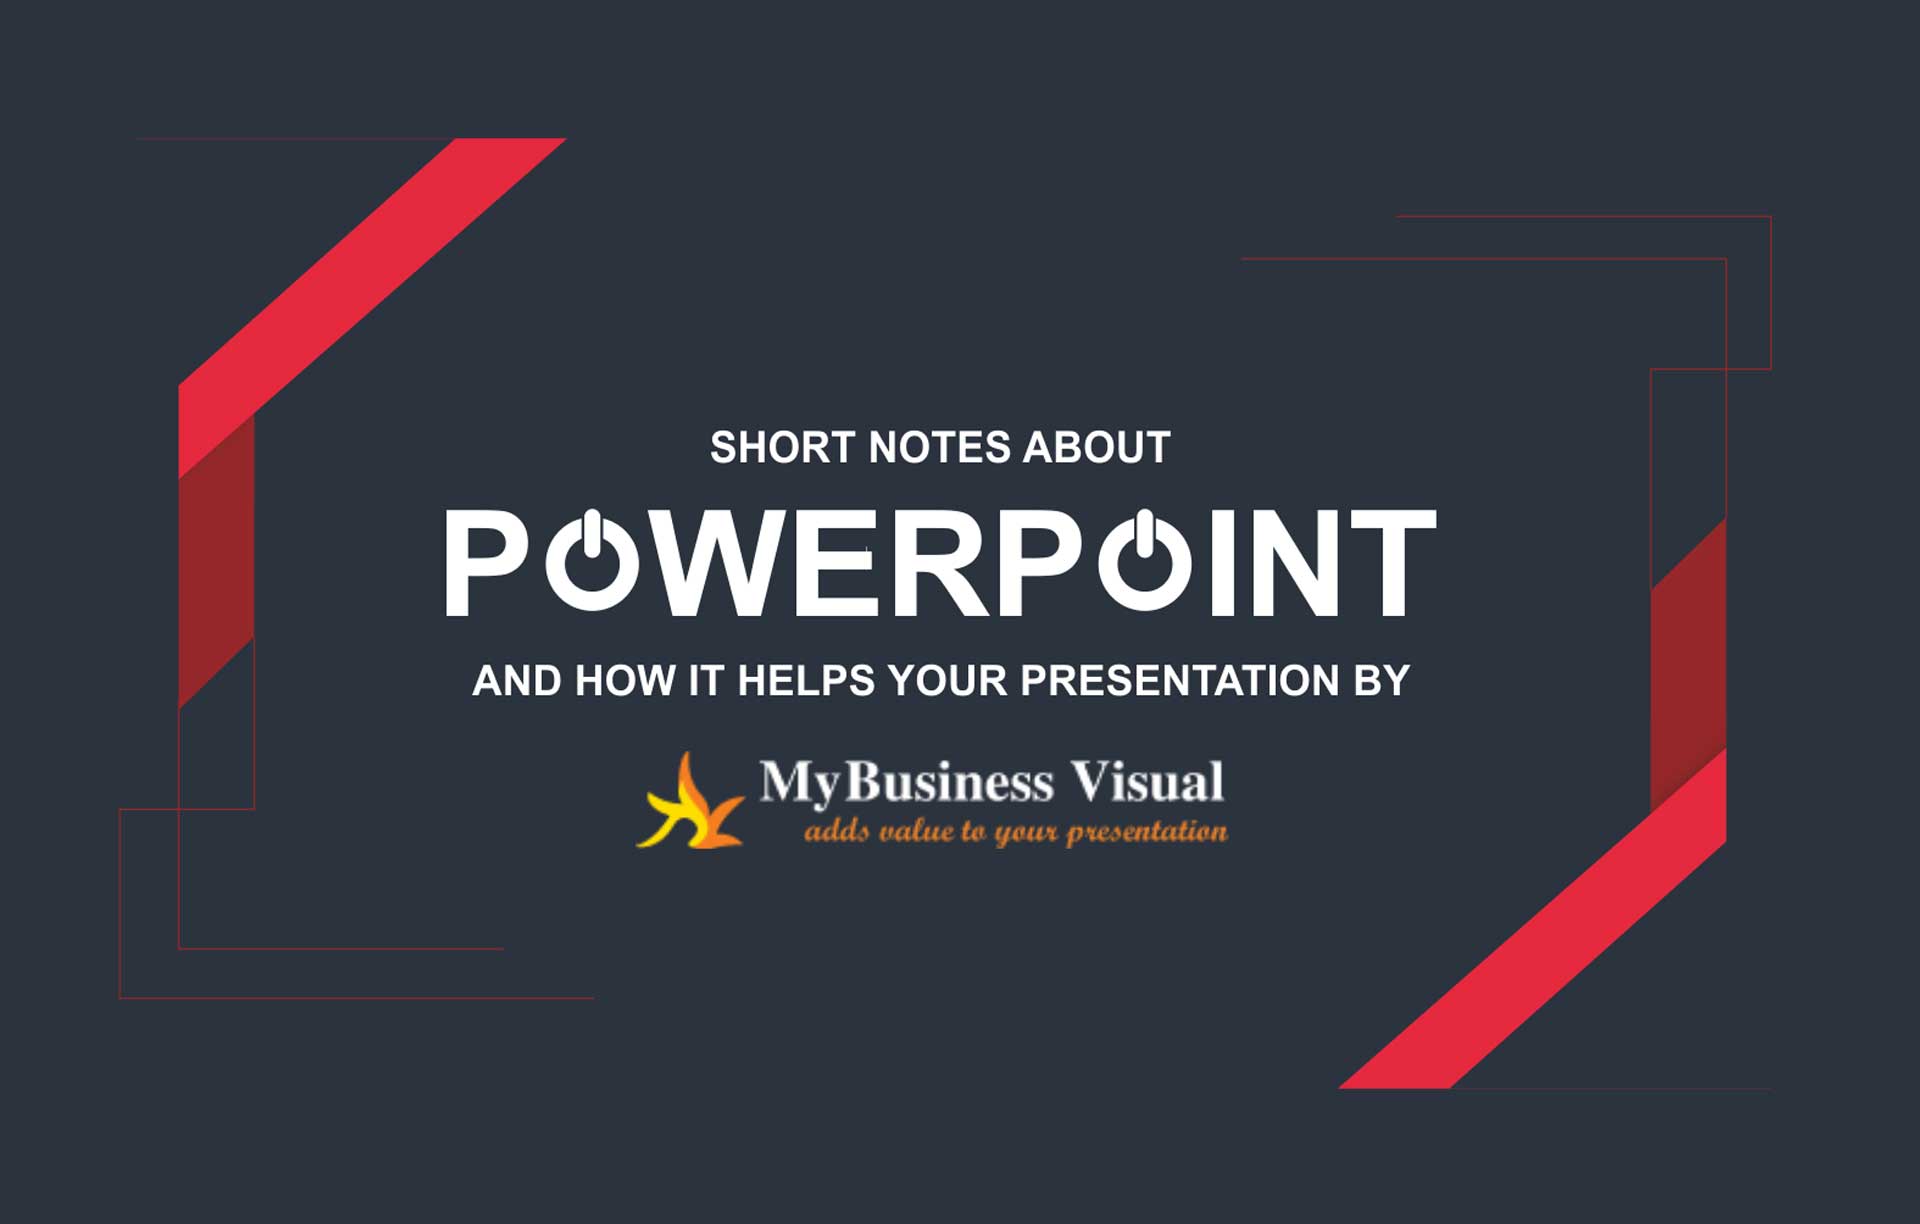 Short Notes about PowerPoint and how it helps your Presentation by Mybusiness Visual